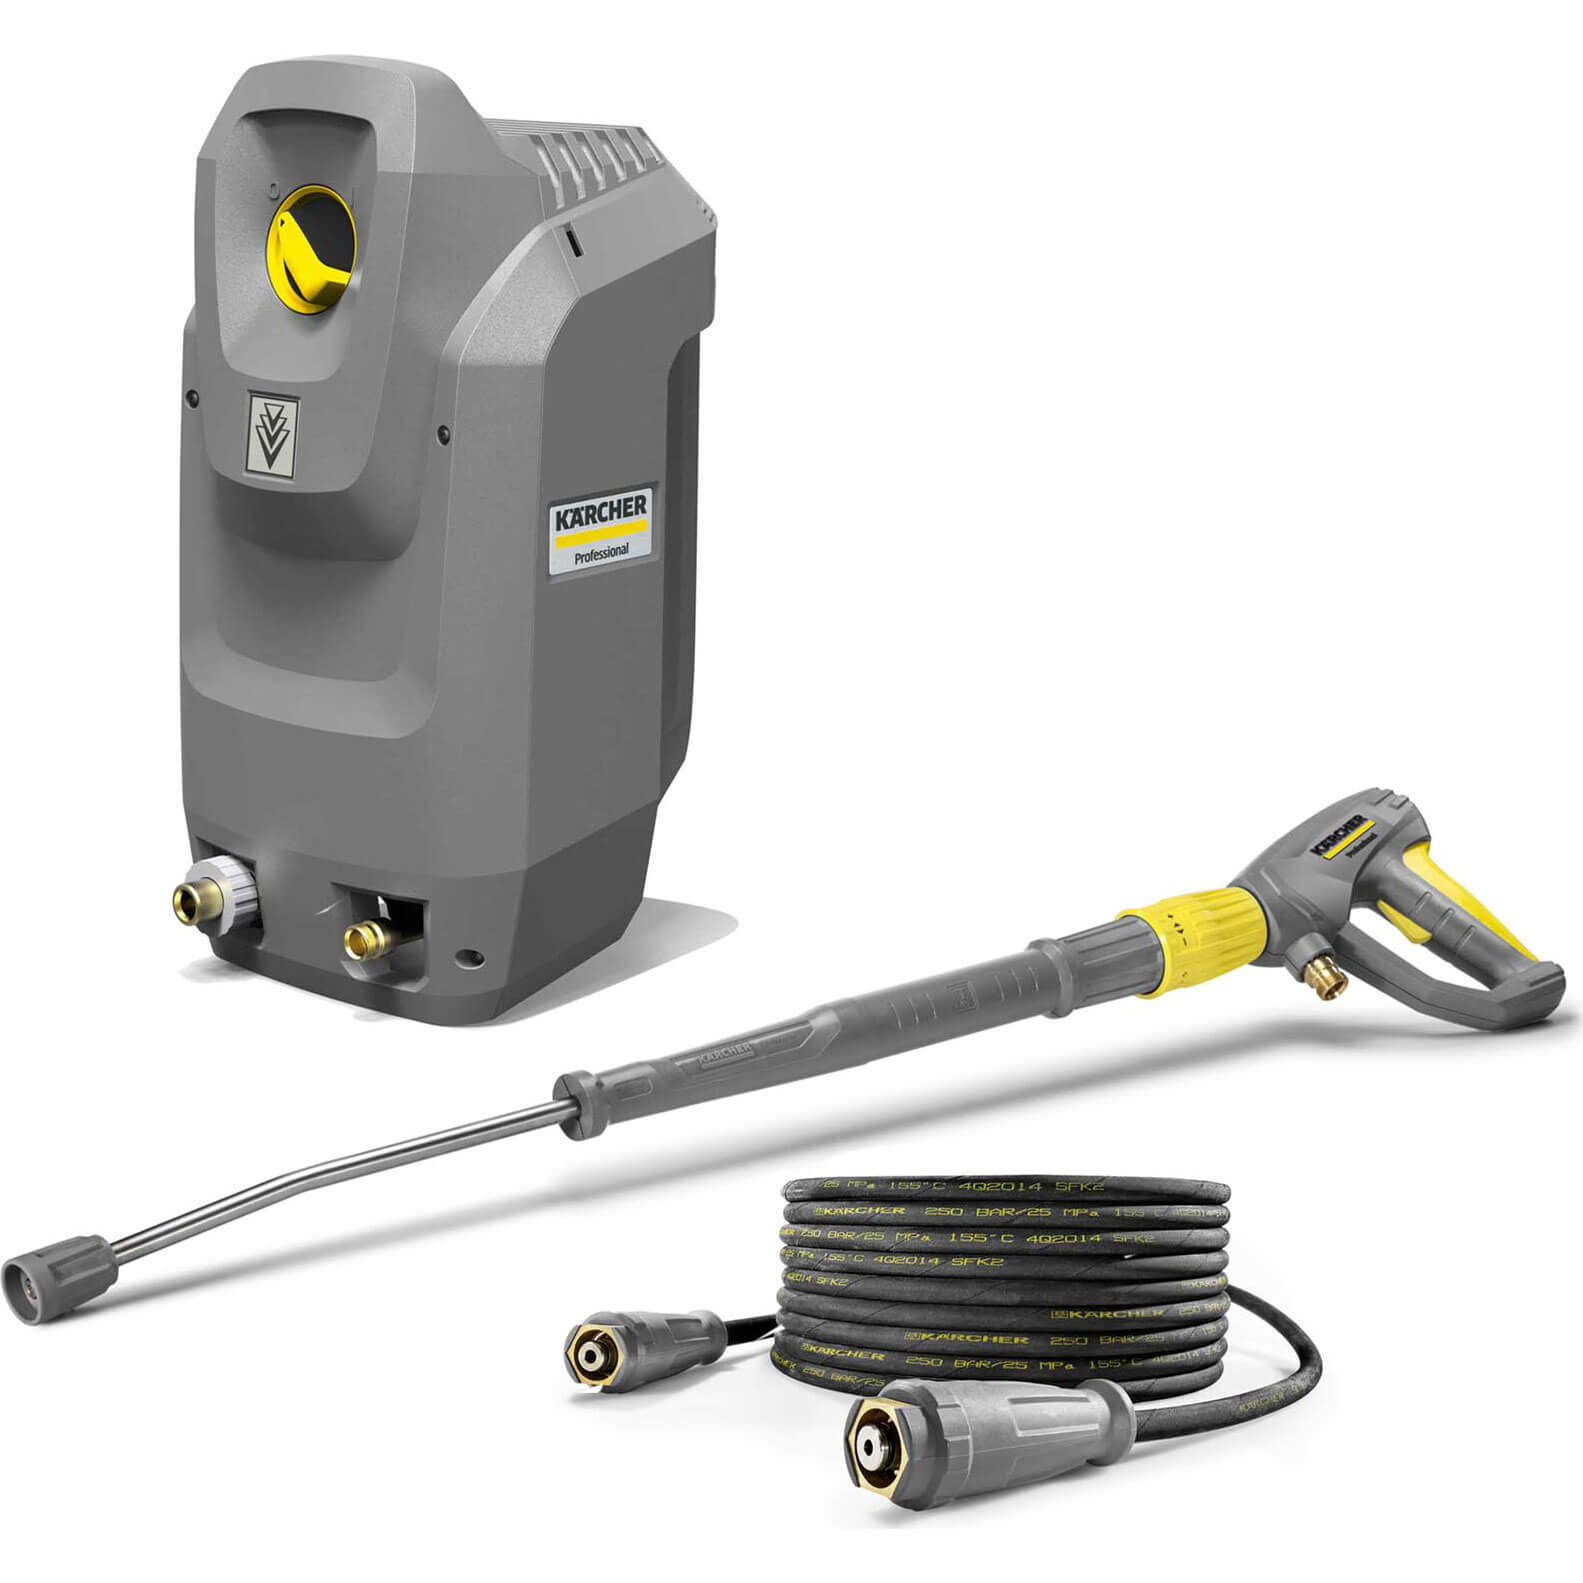 New Karcher Pressure Washer 4m Meter Hose 110 Bar Quick Release New Type 